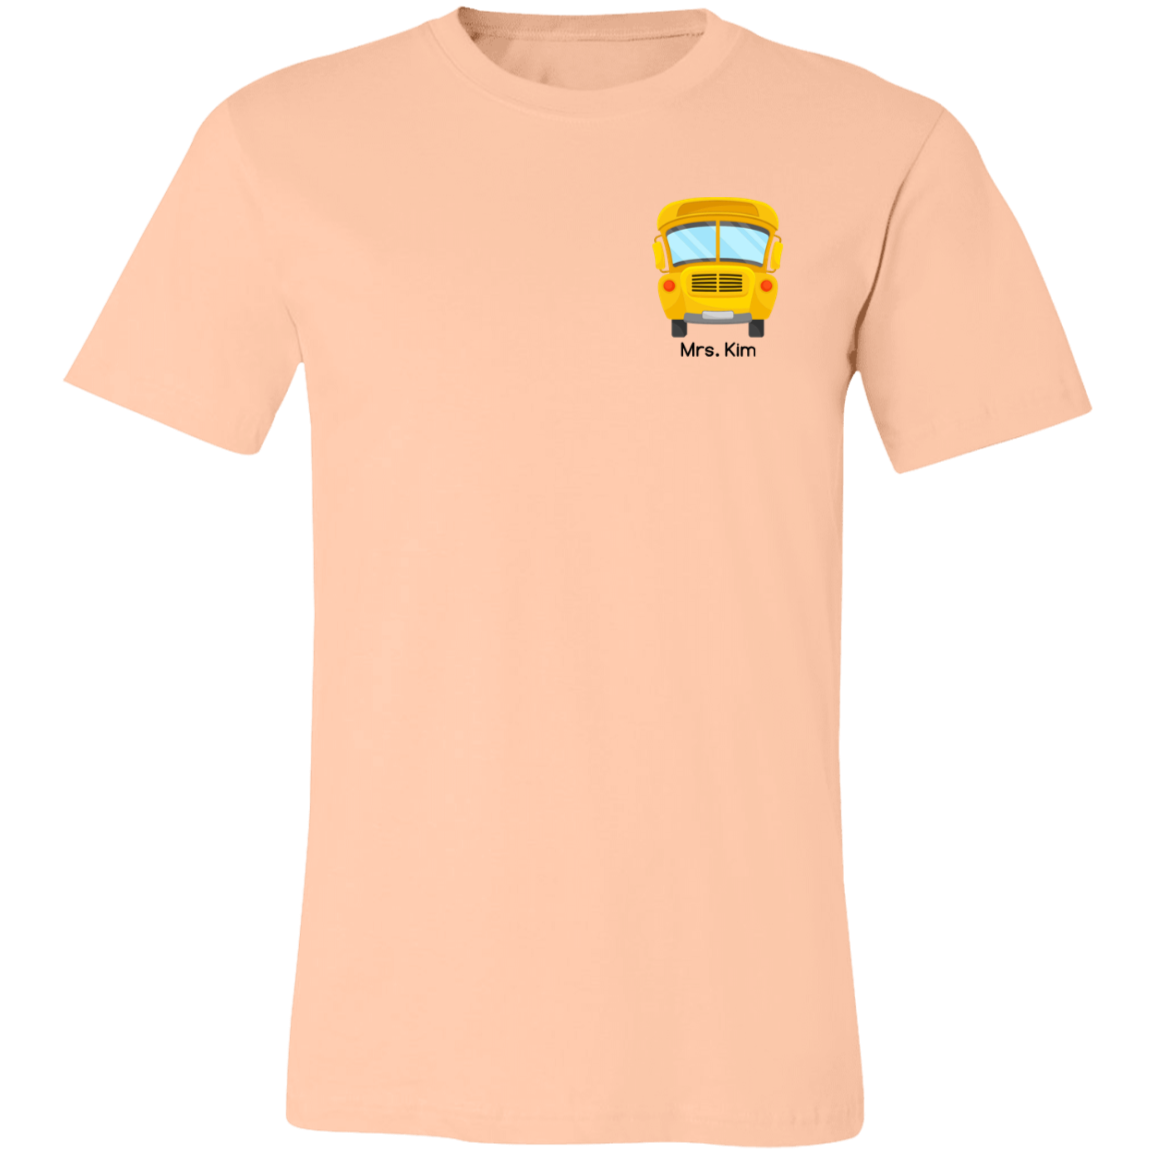 Personalized Bus driver T-Shirt